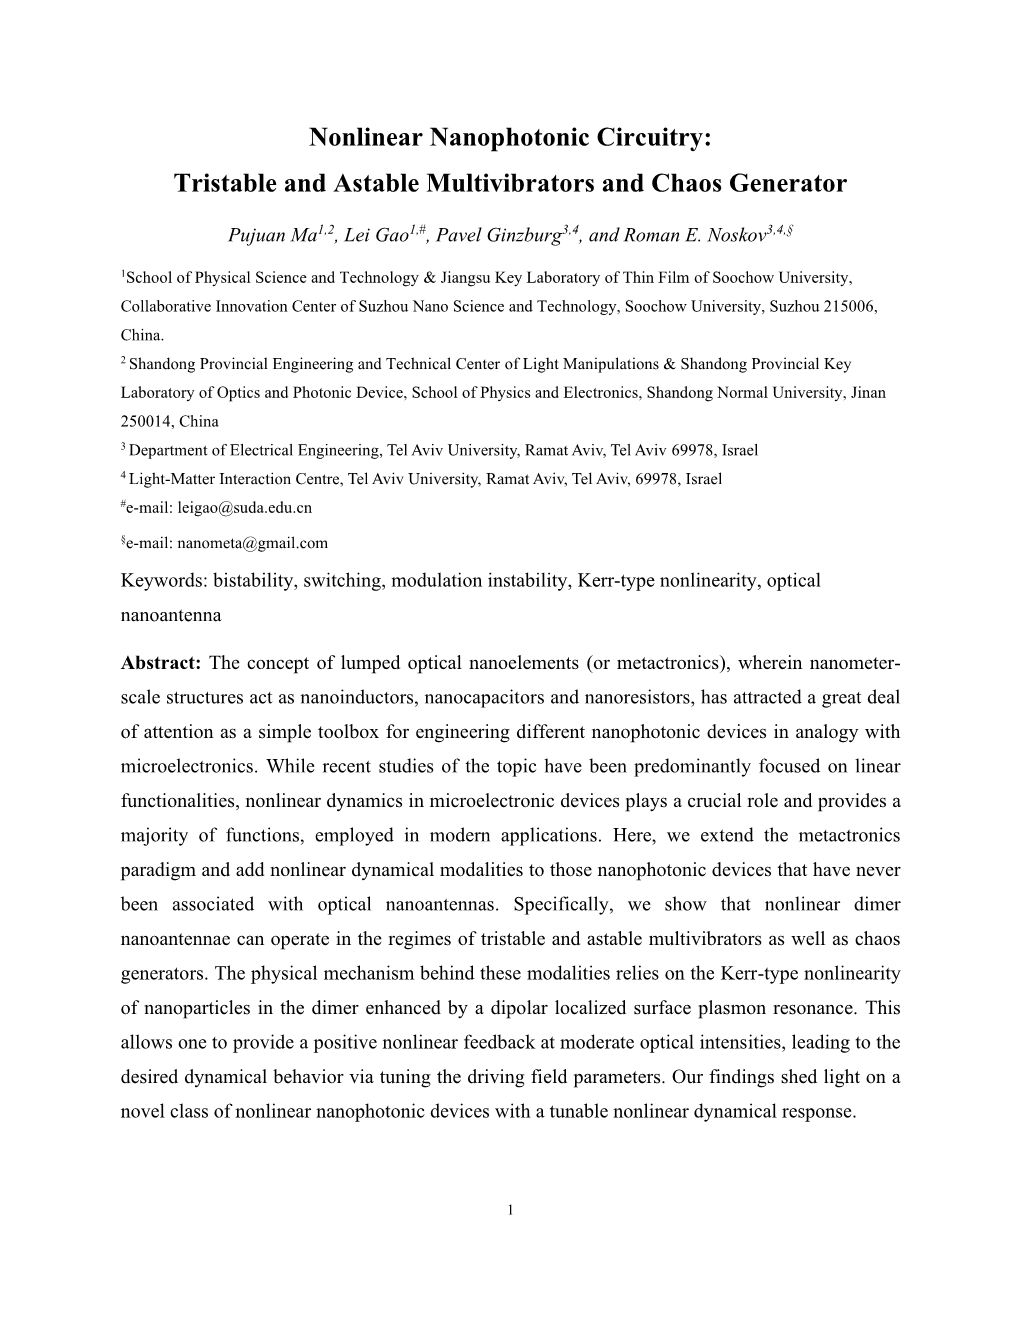 Tristable and Astable Multivibrators and Chaos Generator